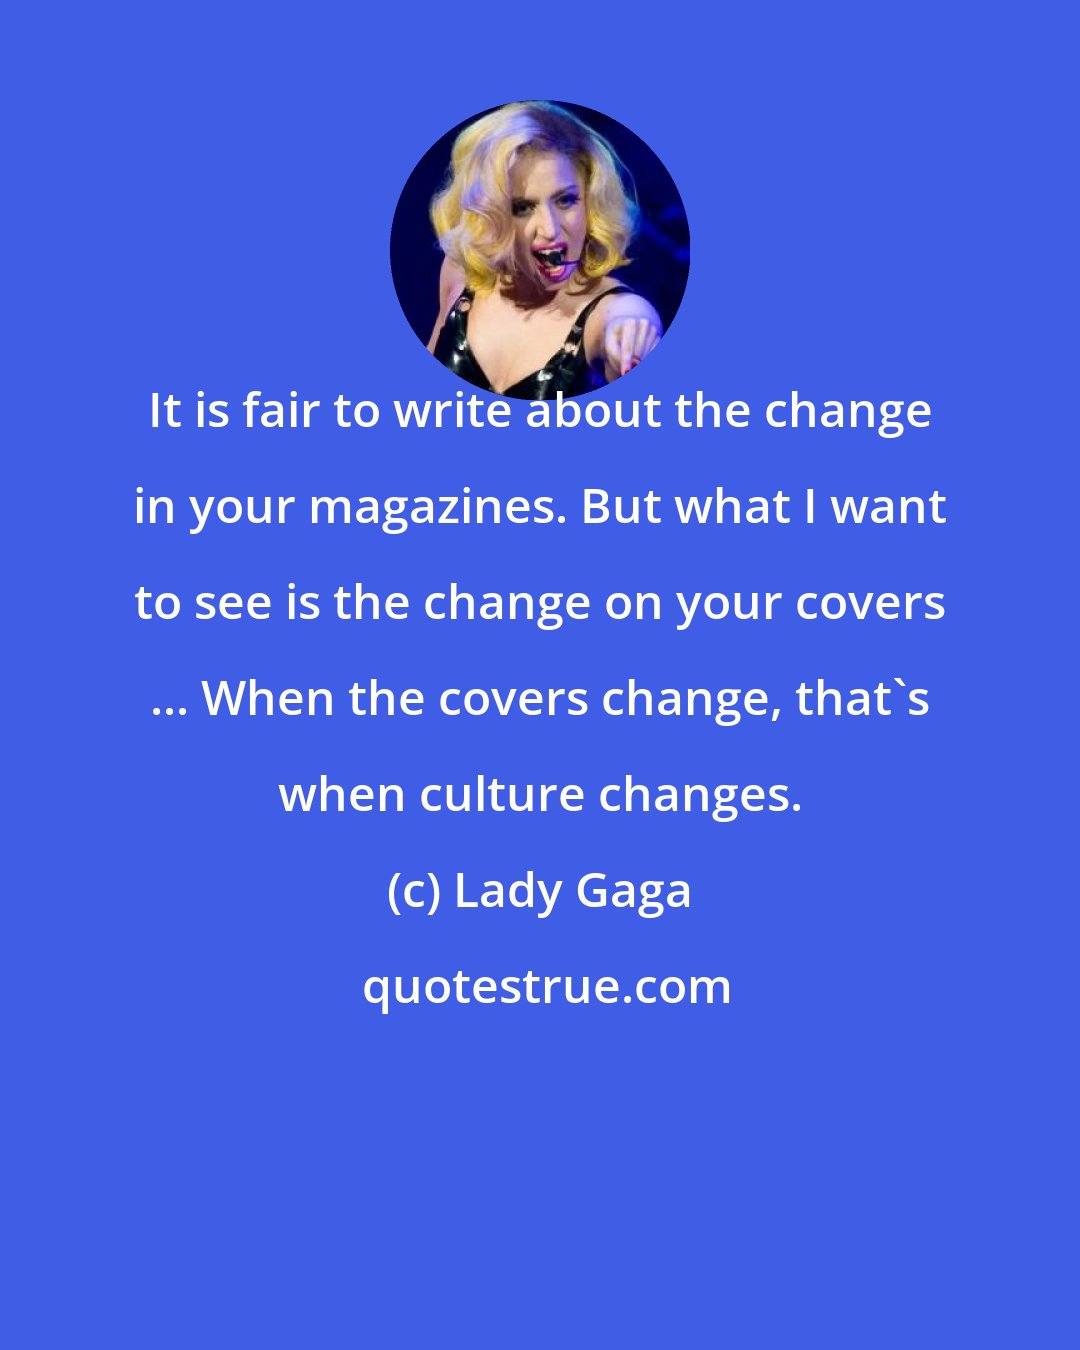 Lady Gaga: It is fair to write about the change in your magazines. But what I want to see is the change on your covers ... When the covers change, that's when culture changes.